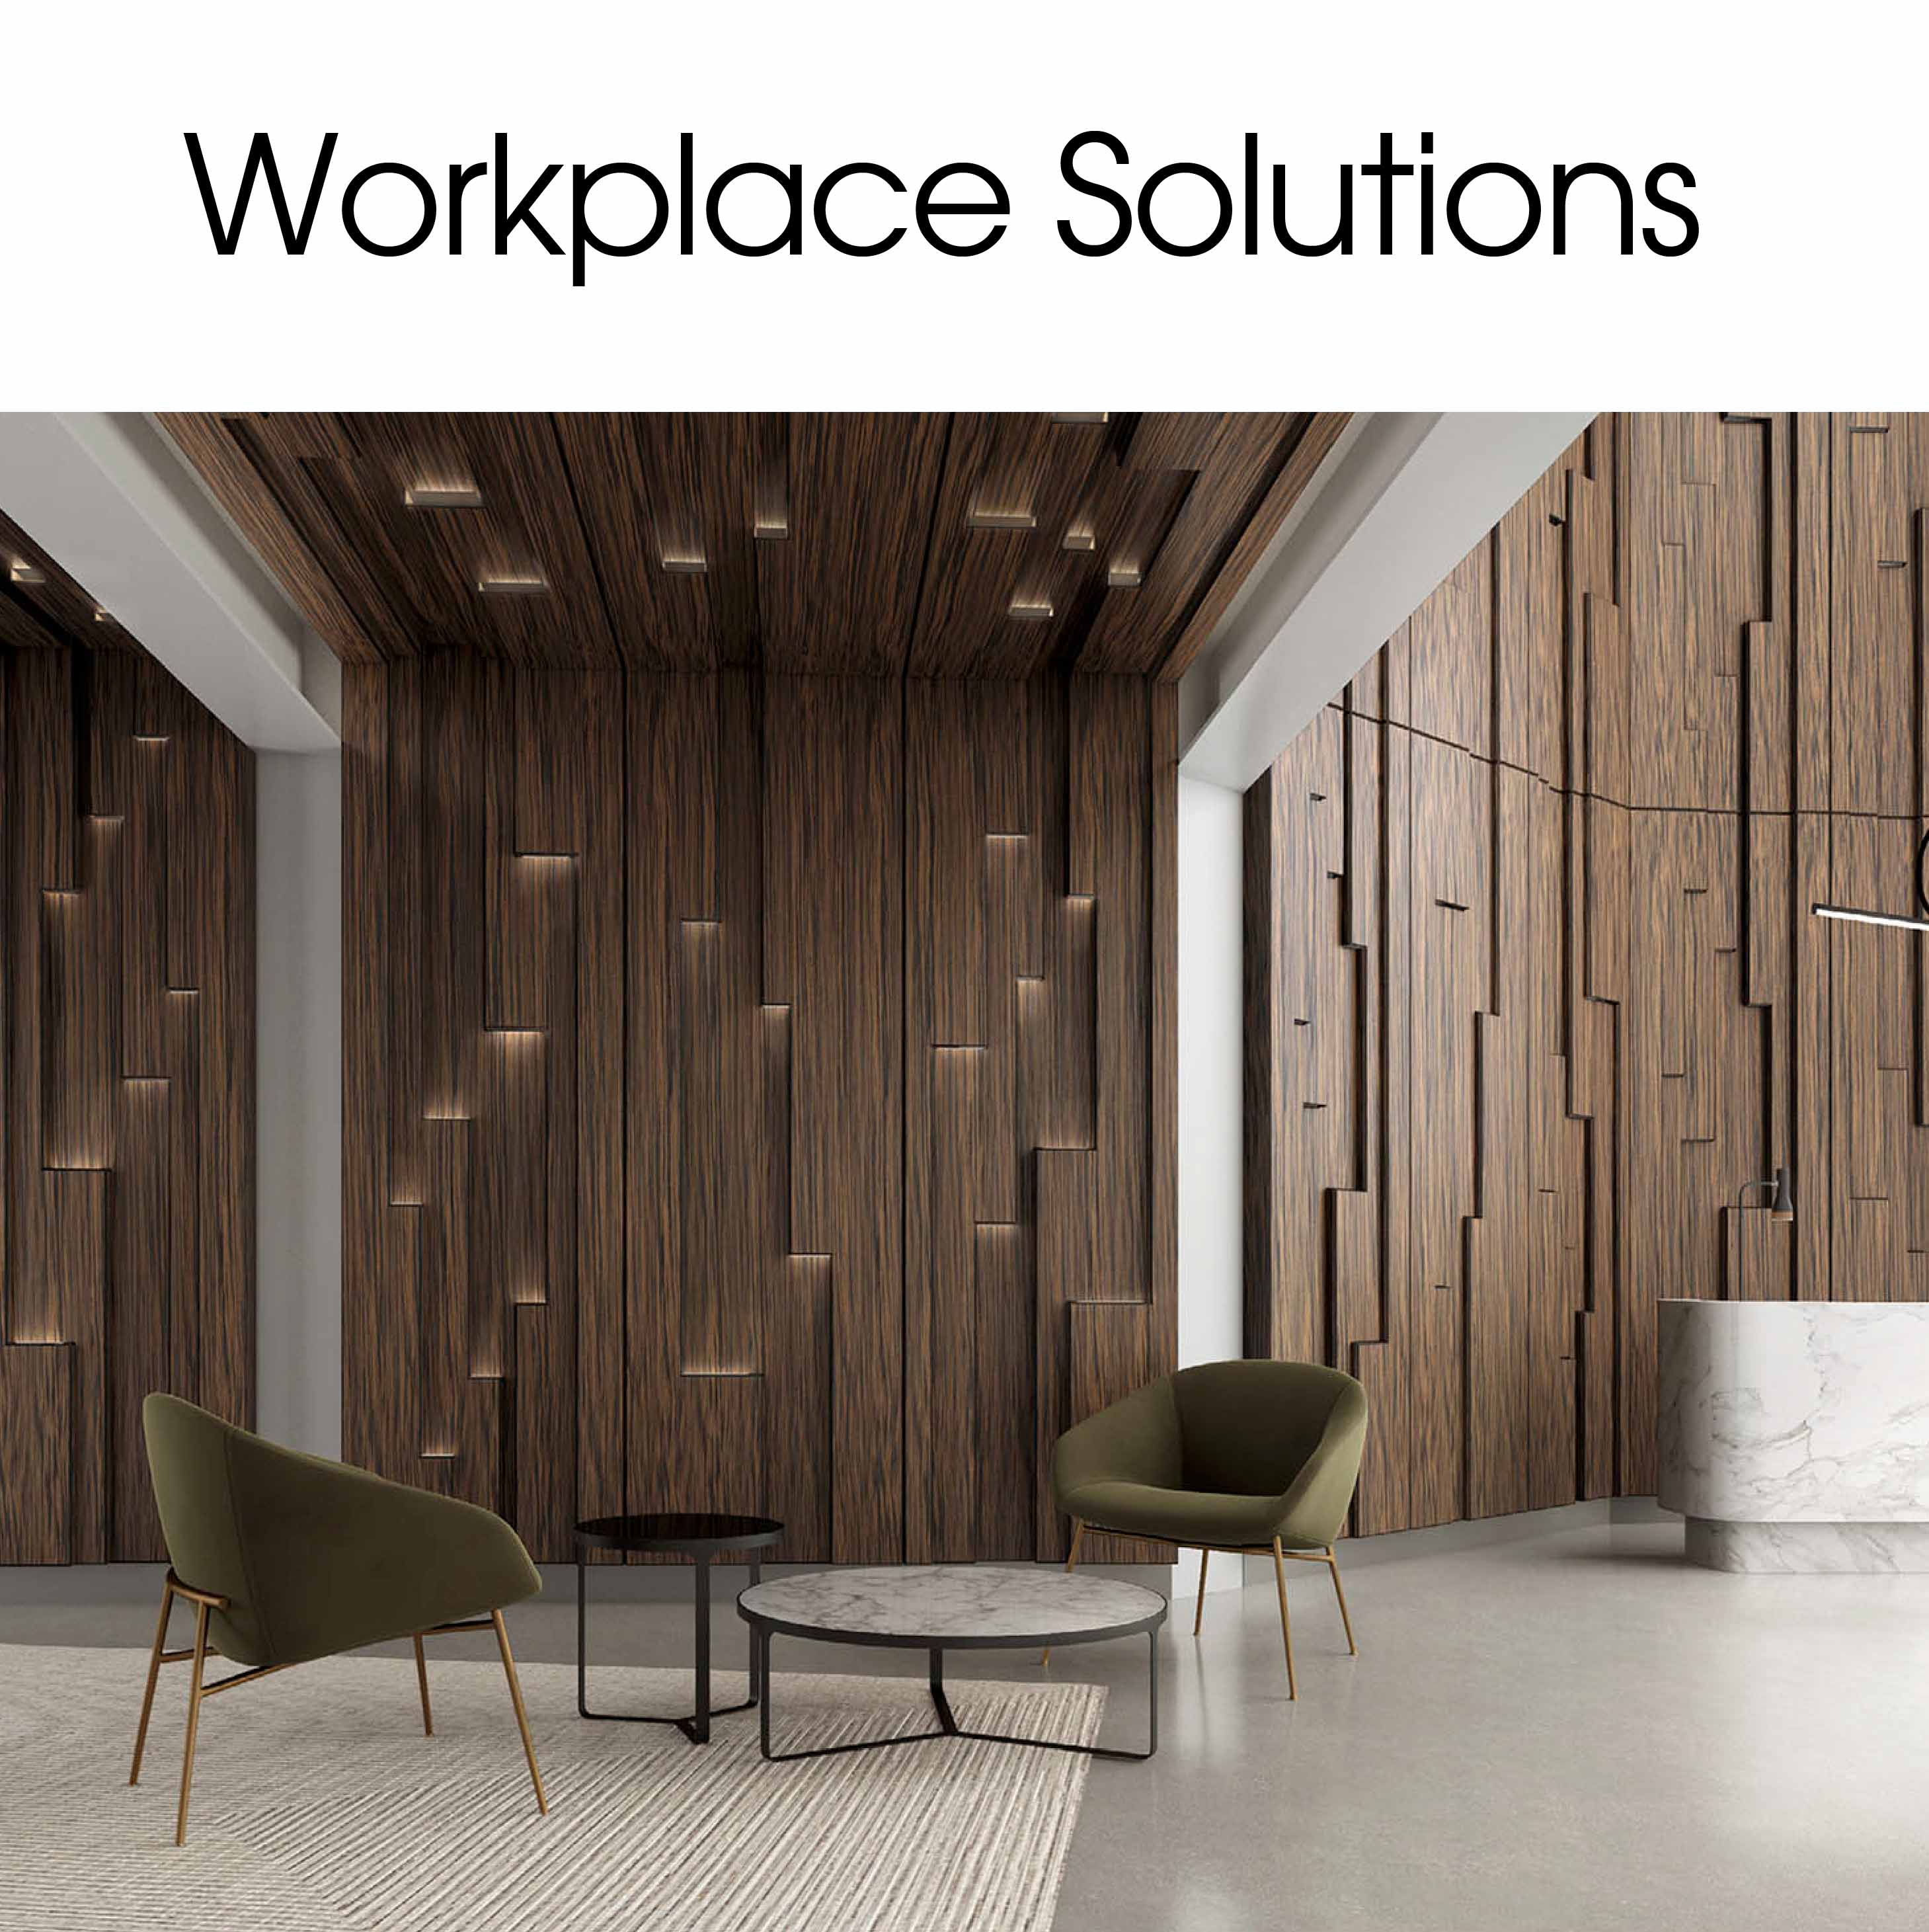 Workplace Solutions | Intriguing 3D surfaces